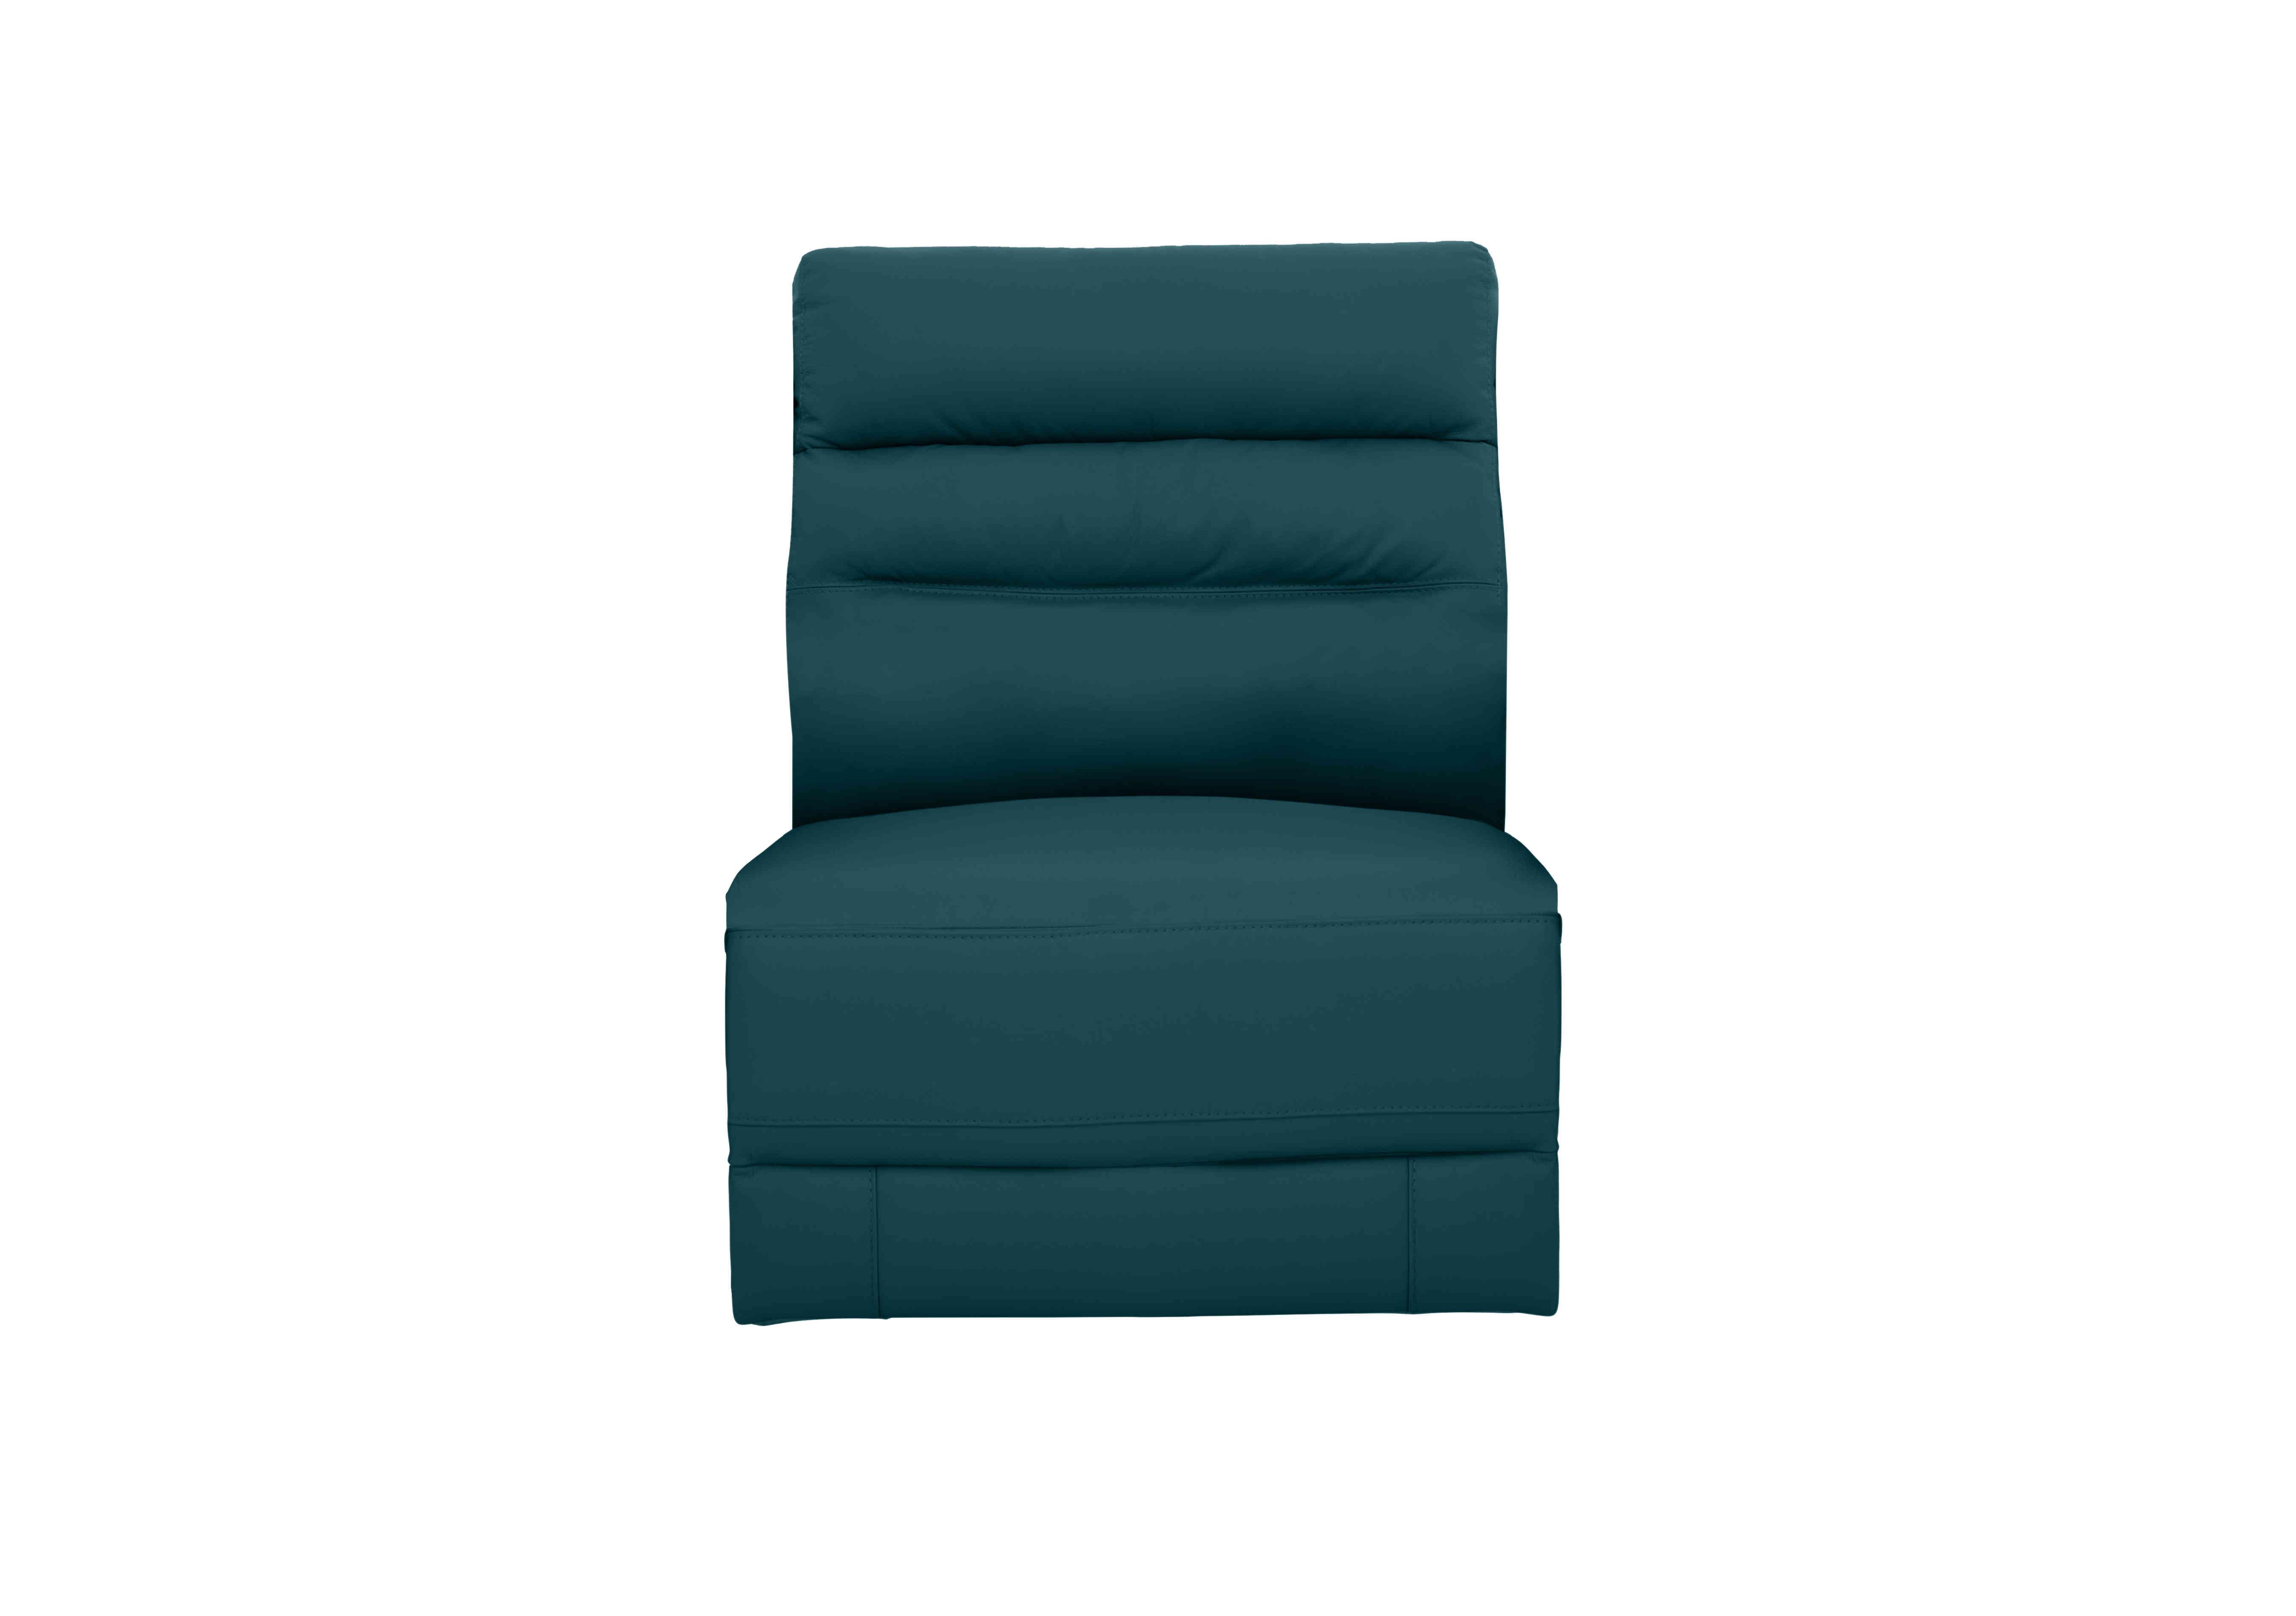 Berlin Leather Armless Unit in Midnight Jade Le-9314 on Furniture Village